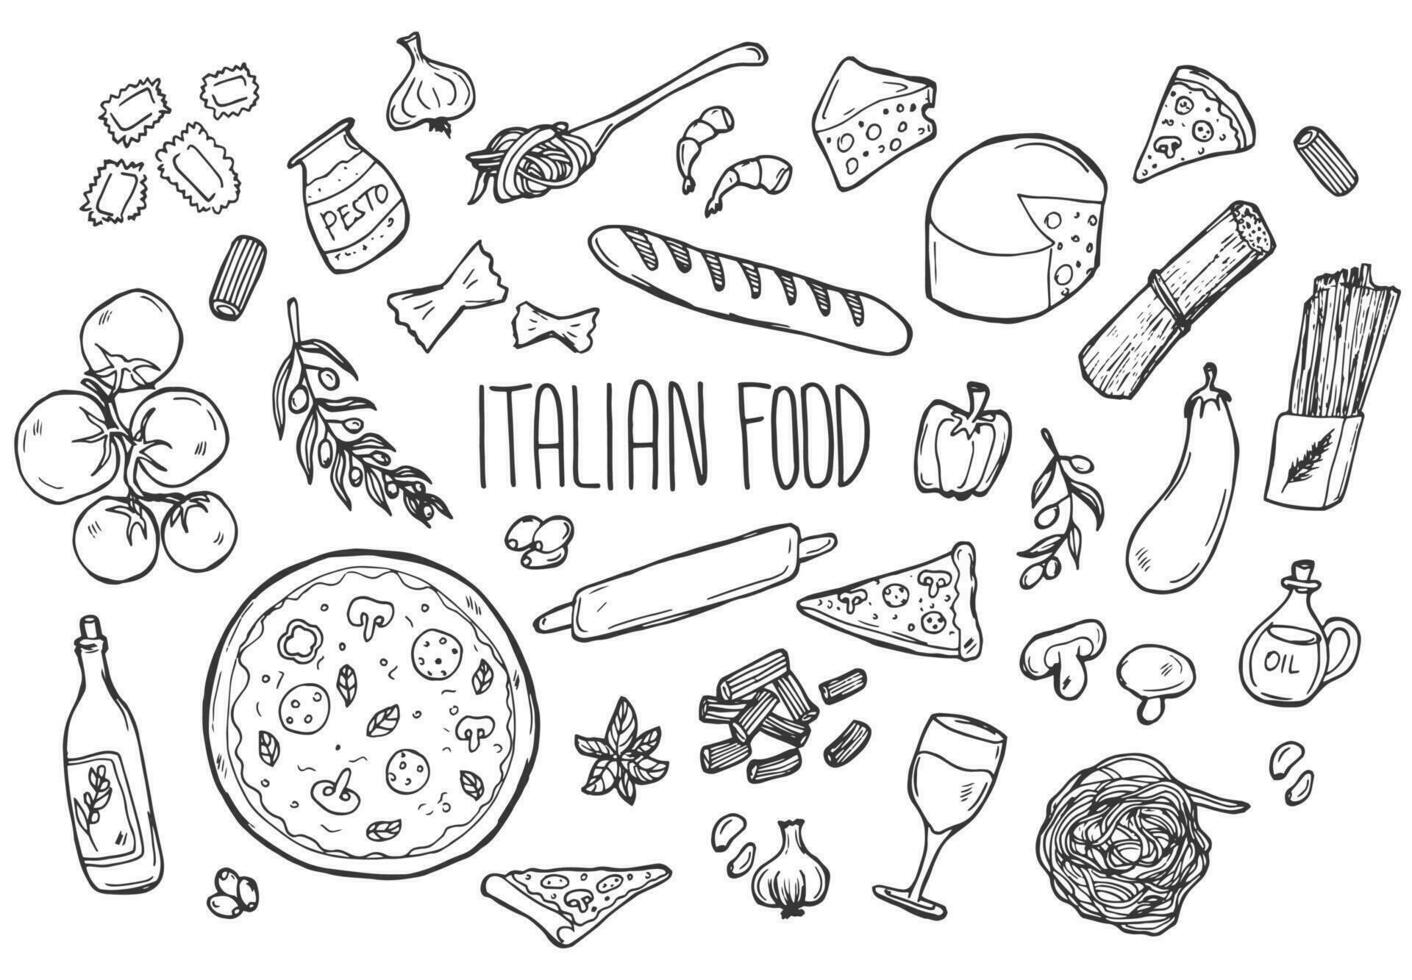 Set of doodles, hand drawn rough simple Italian cuisine food sketches. Isolated on white background vector